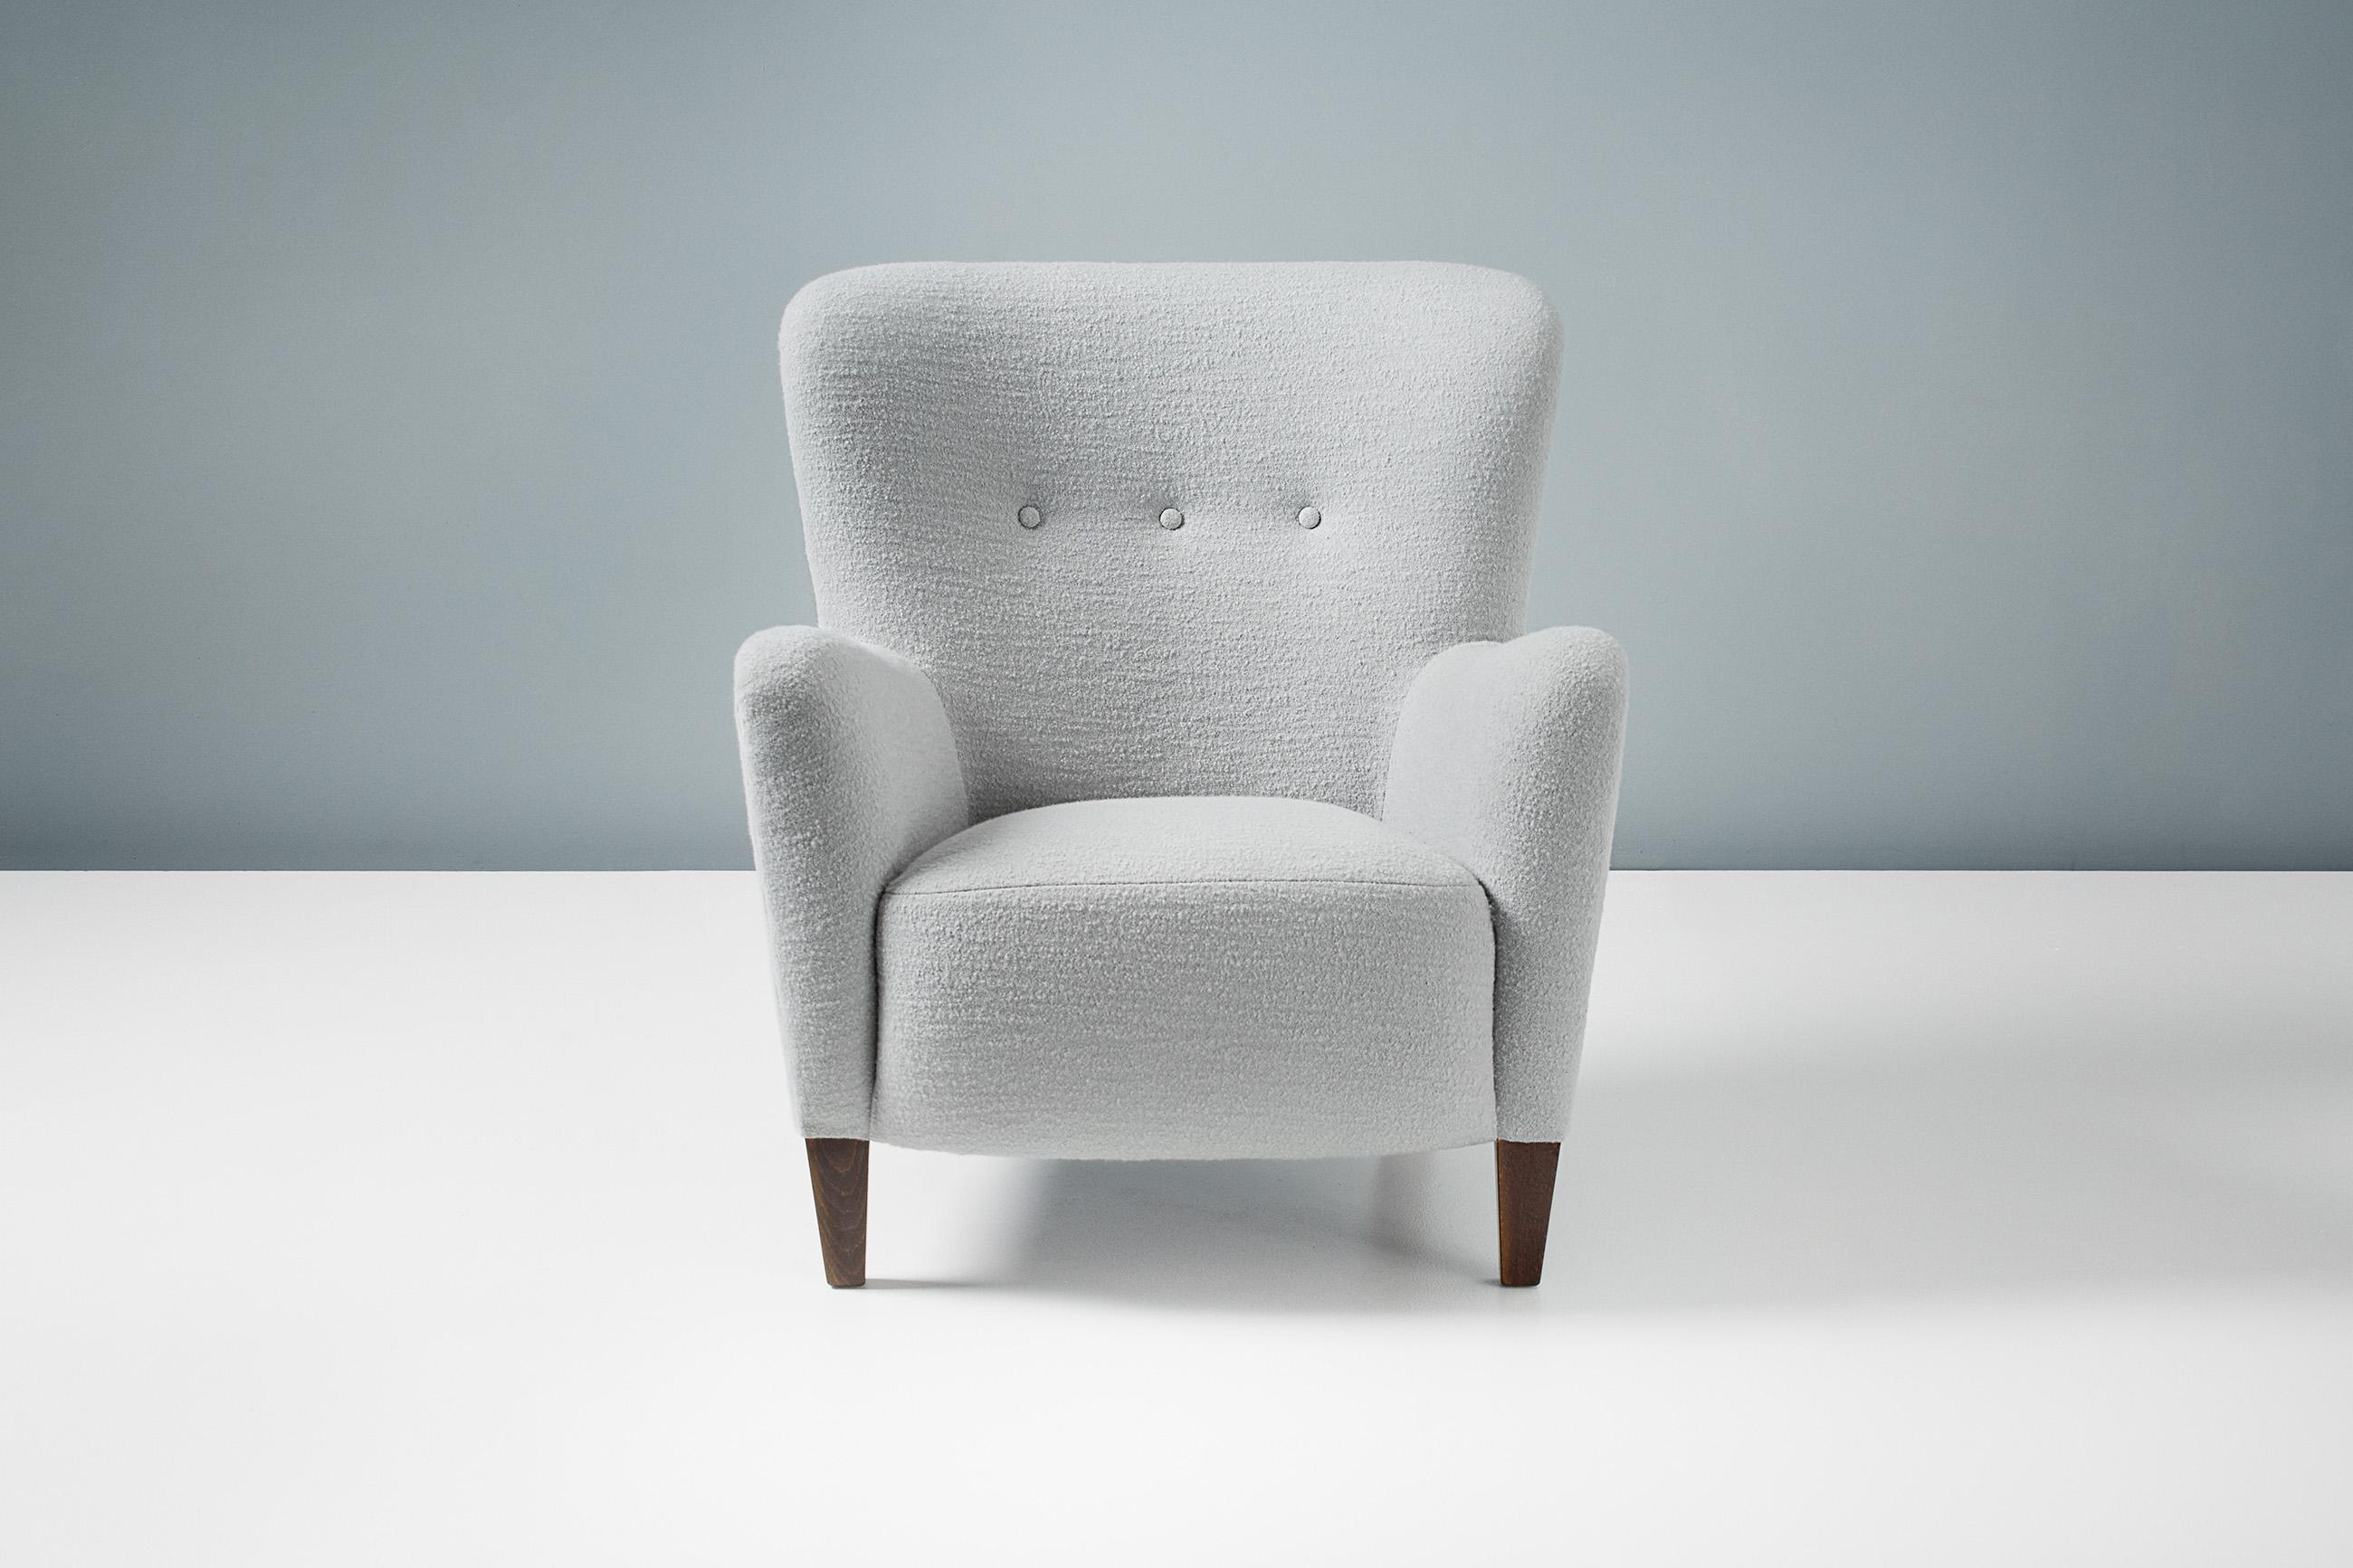 Dagmar design

RYO armchair

Custom made lounge chair developed and produced at our workshops in London using the highest quality materials. This example is upholstered in luxurious Chase Erwin wool fabric and features stained beech legs. The